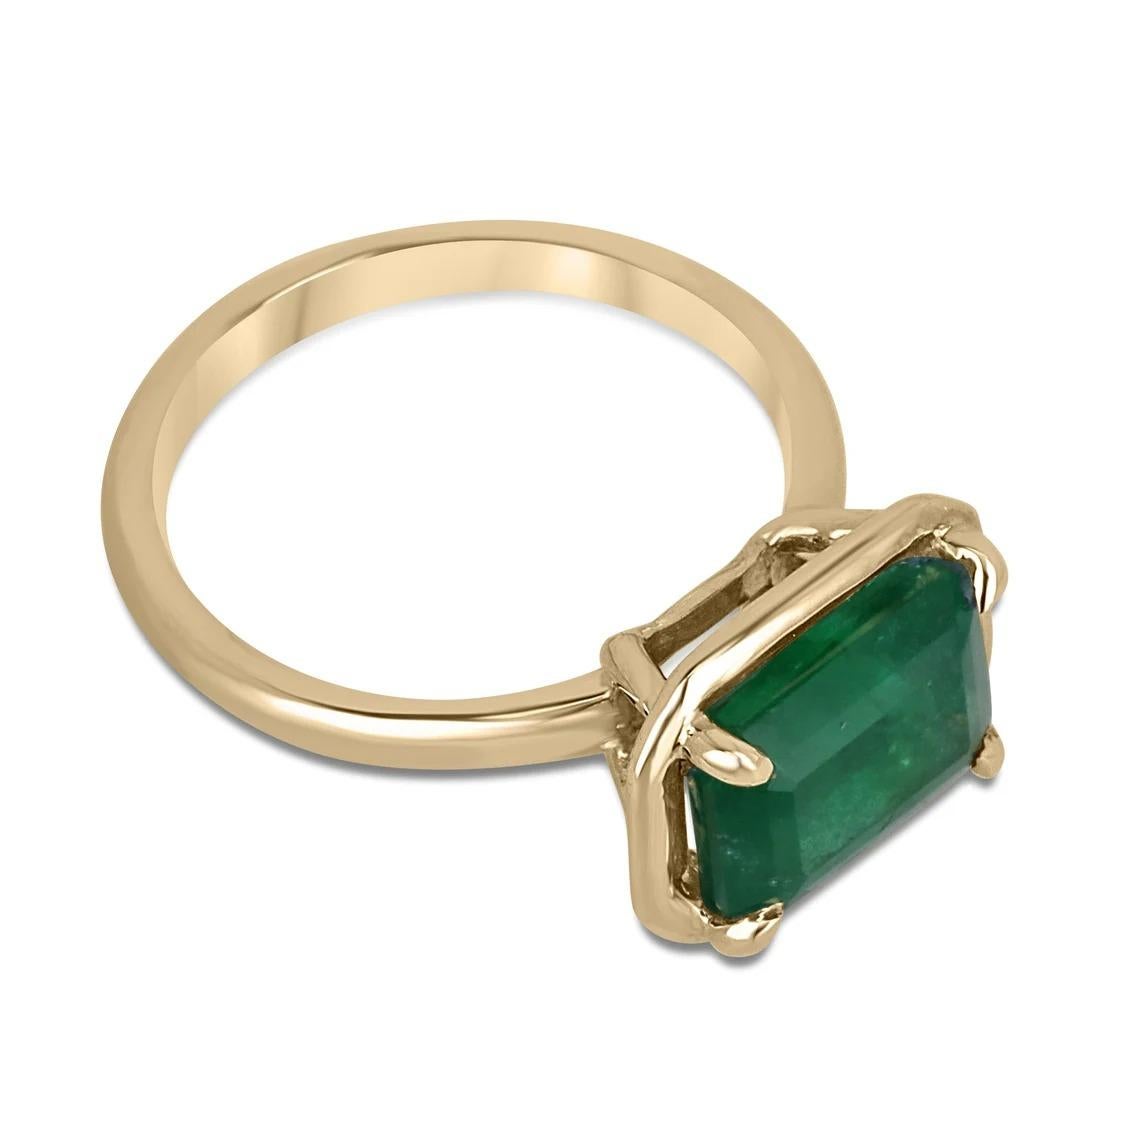 This stunning solitaire ring features a breathtaking 3.92-carat natural emerald cut emerald, set in a unique east-to-west orientation and held securely in place by a four-claw prong setting with a half-bezel design. The gemstone boasts a deep, rich